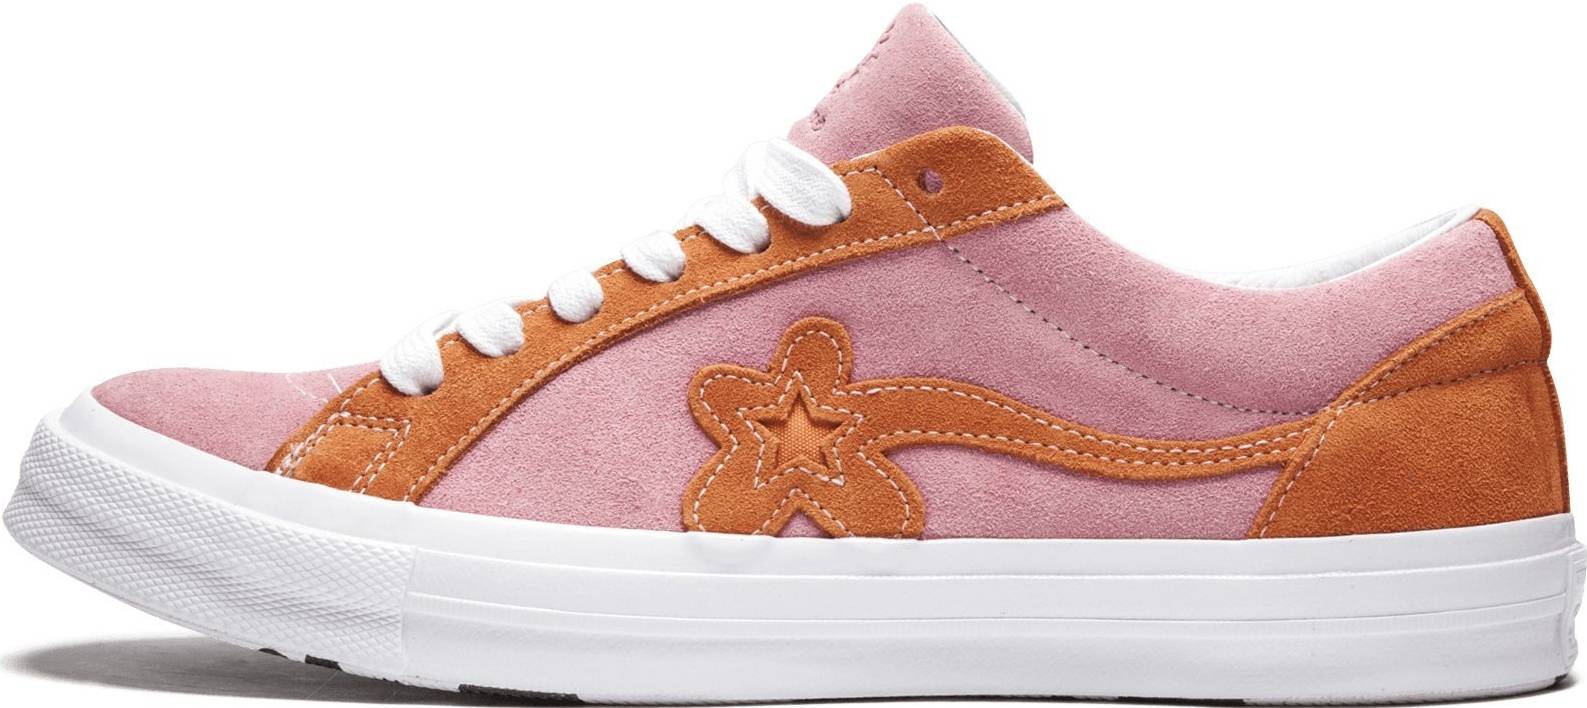 Converse One Star x Le Fleur sneakers in 5 colors | RunRepeat